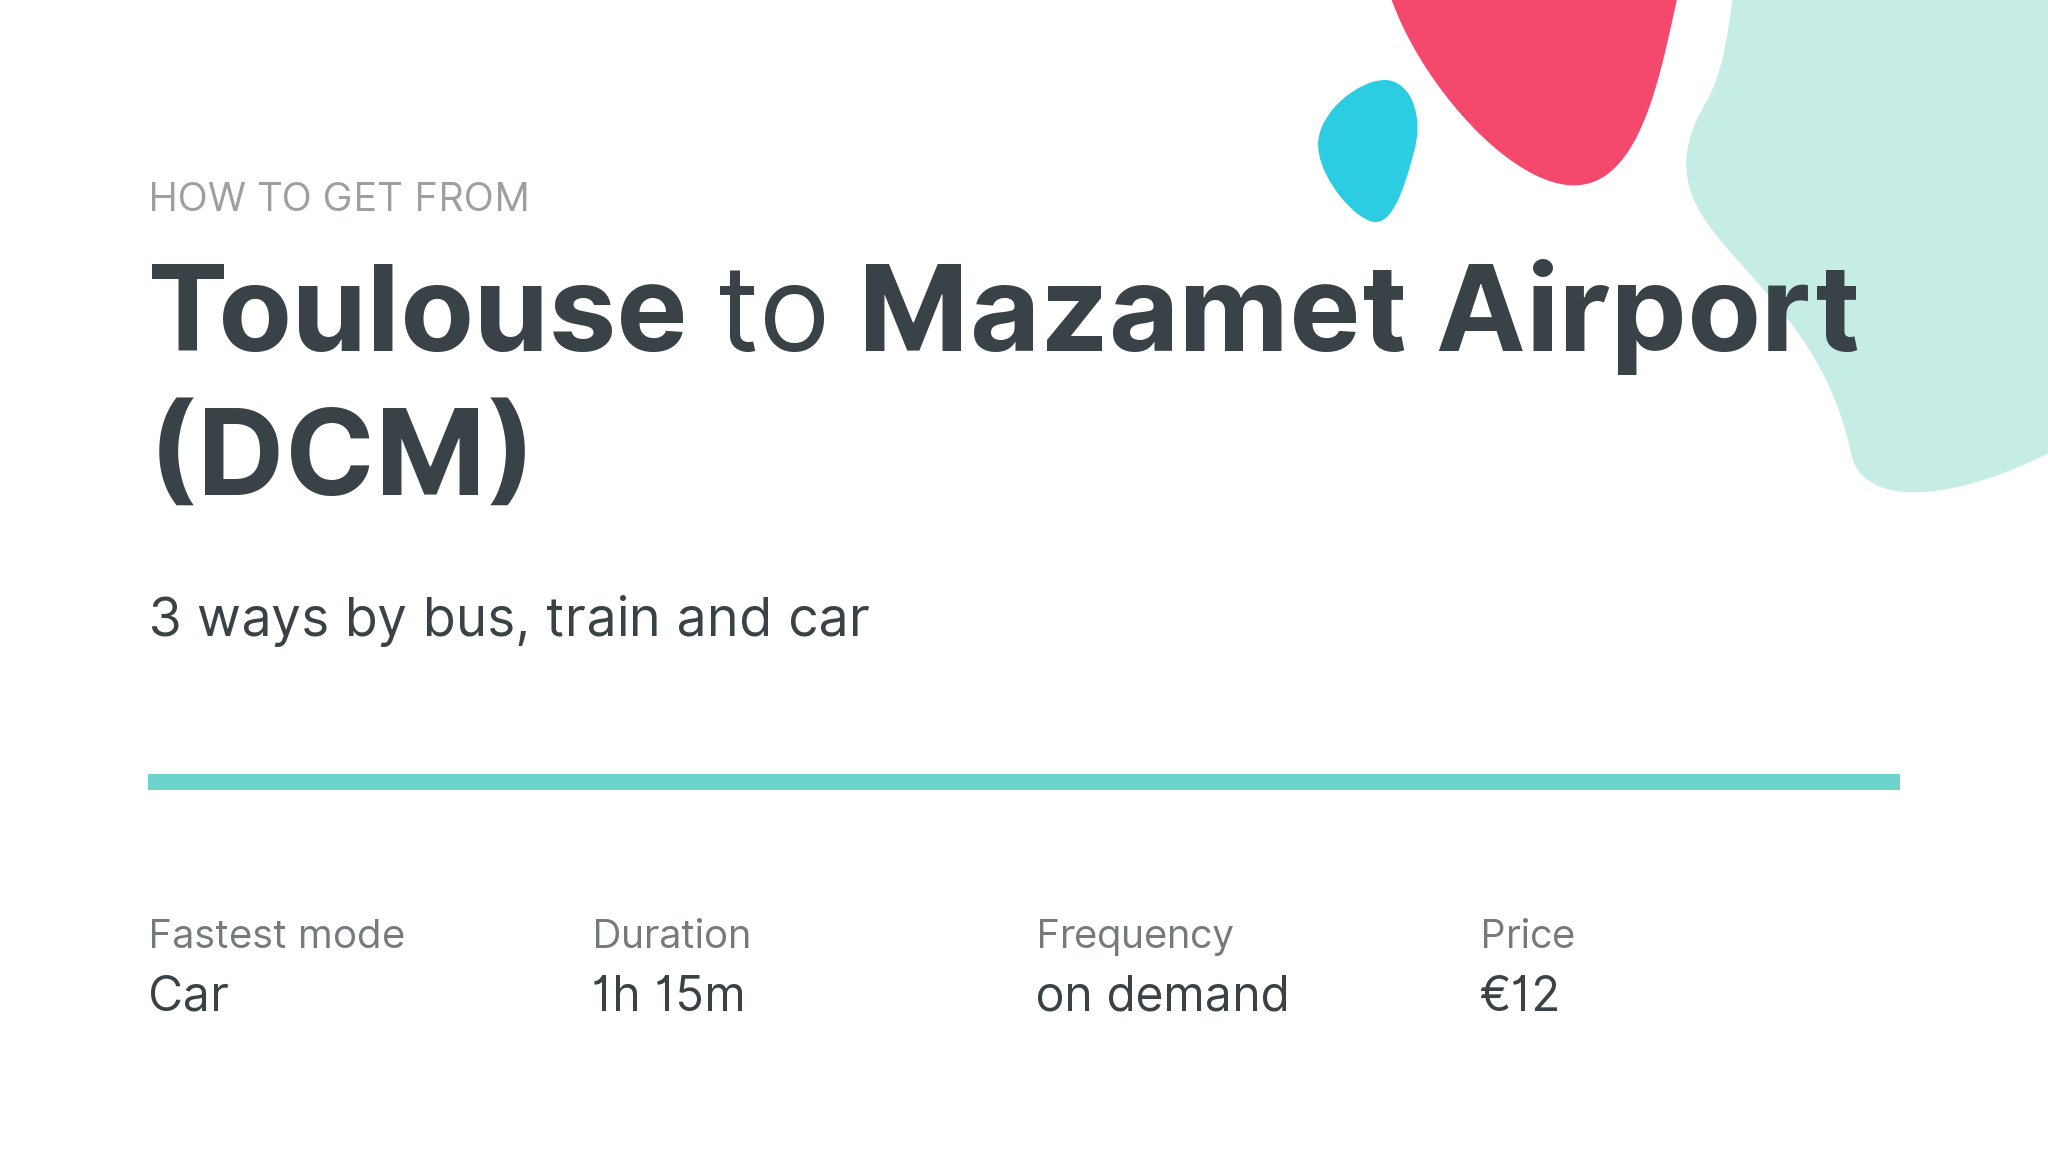 How do I get from Toulouse to Mazamet Airport (DCM)